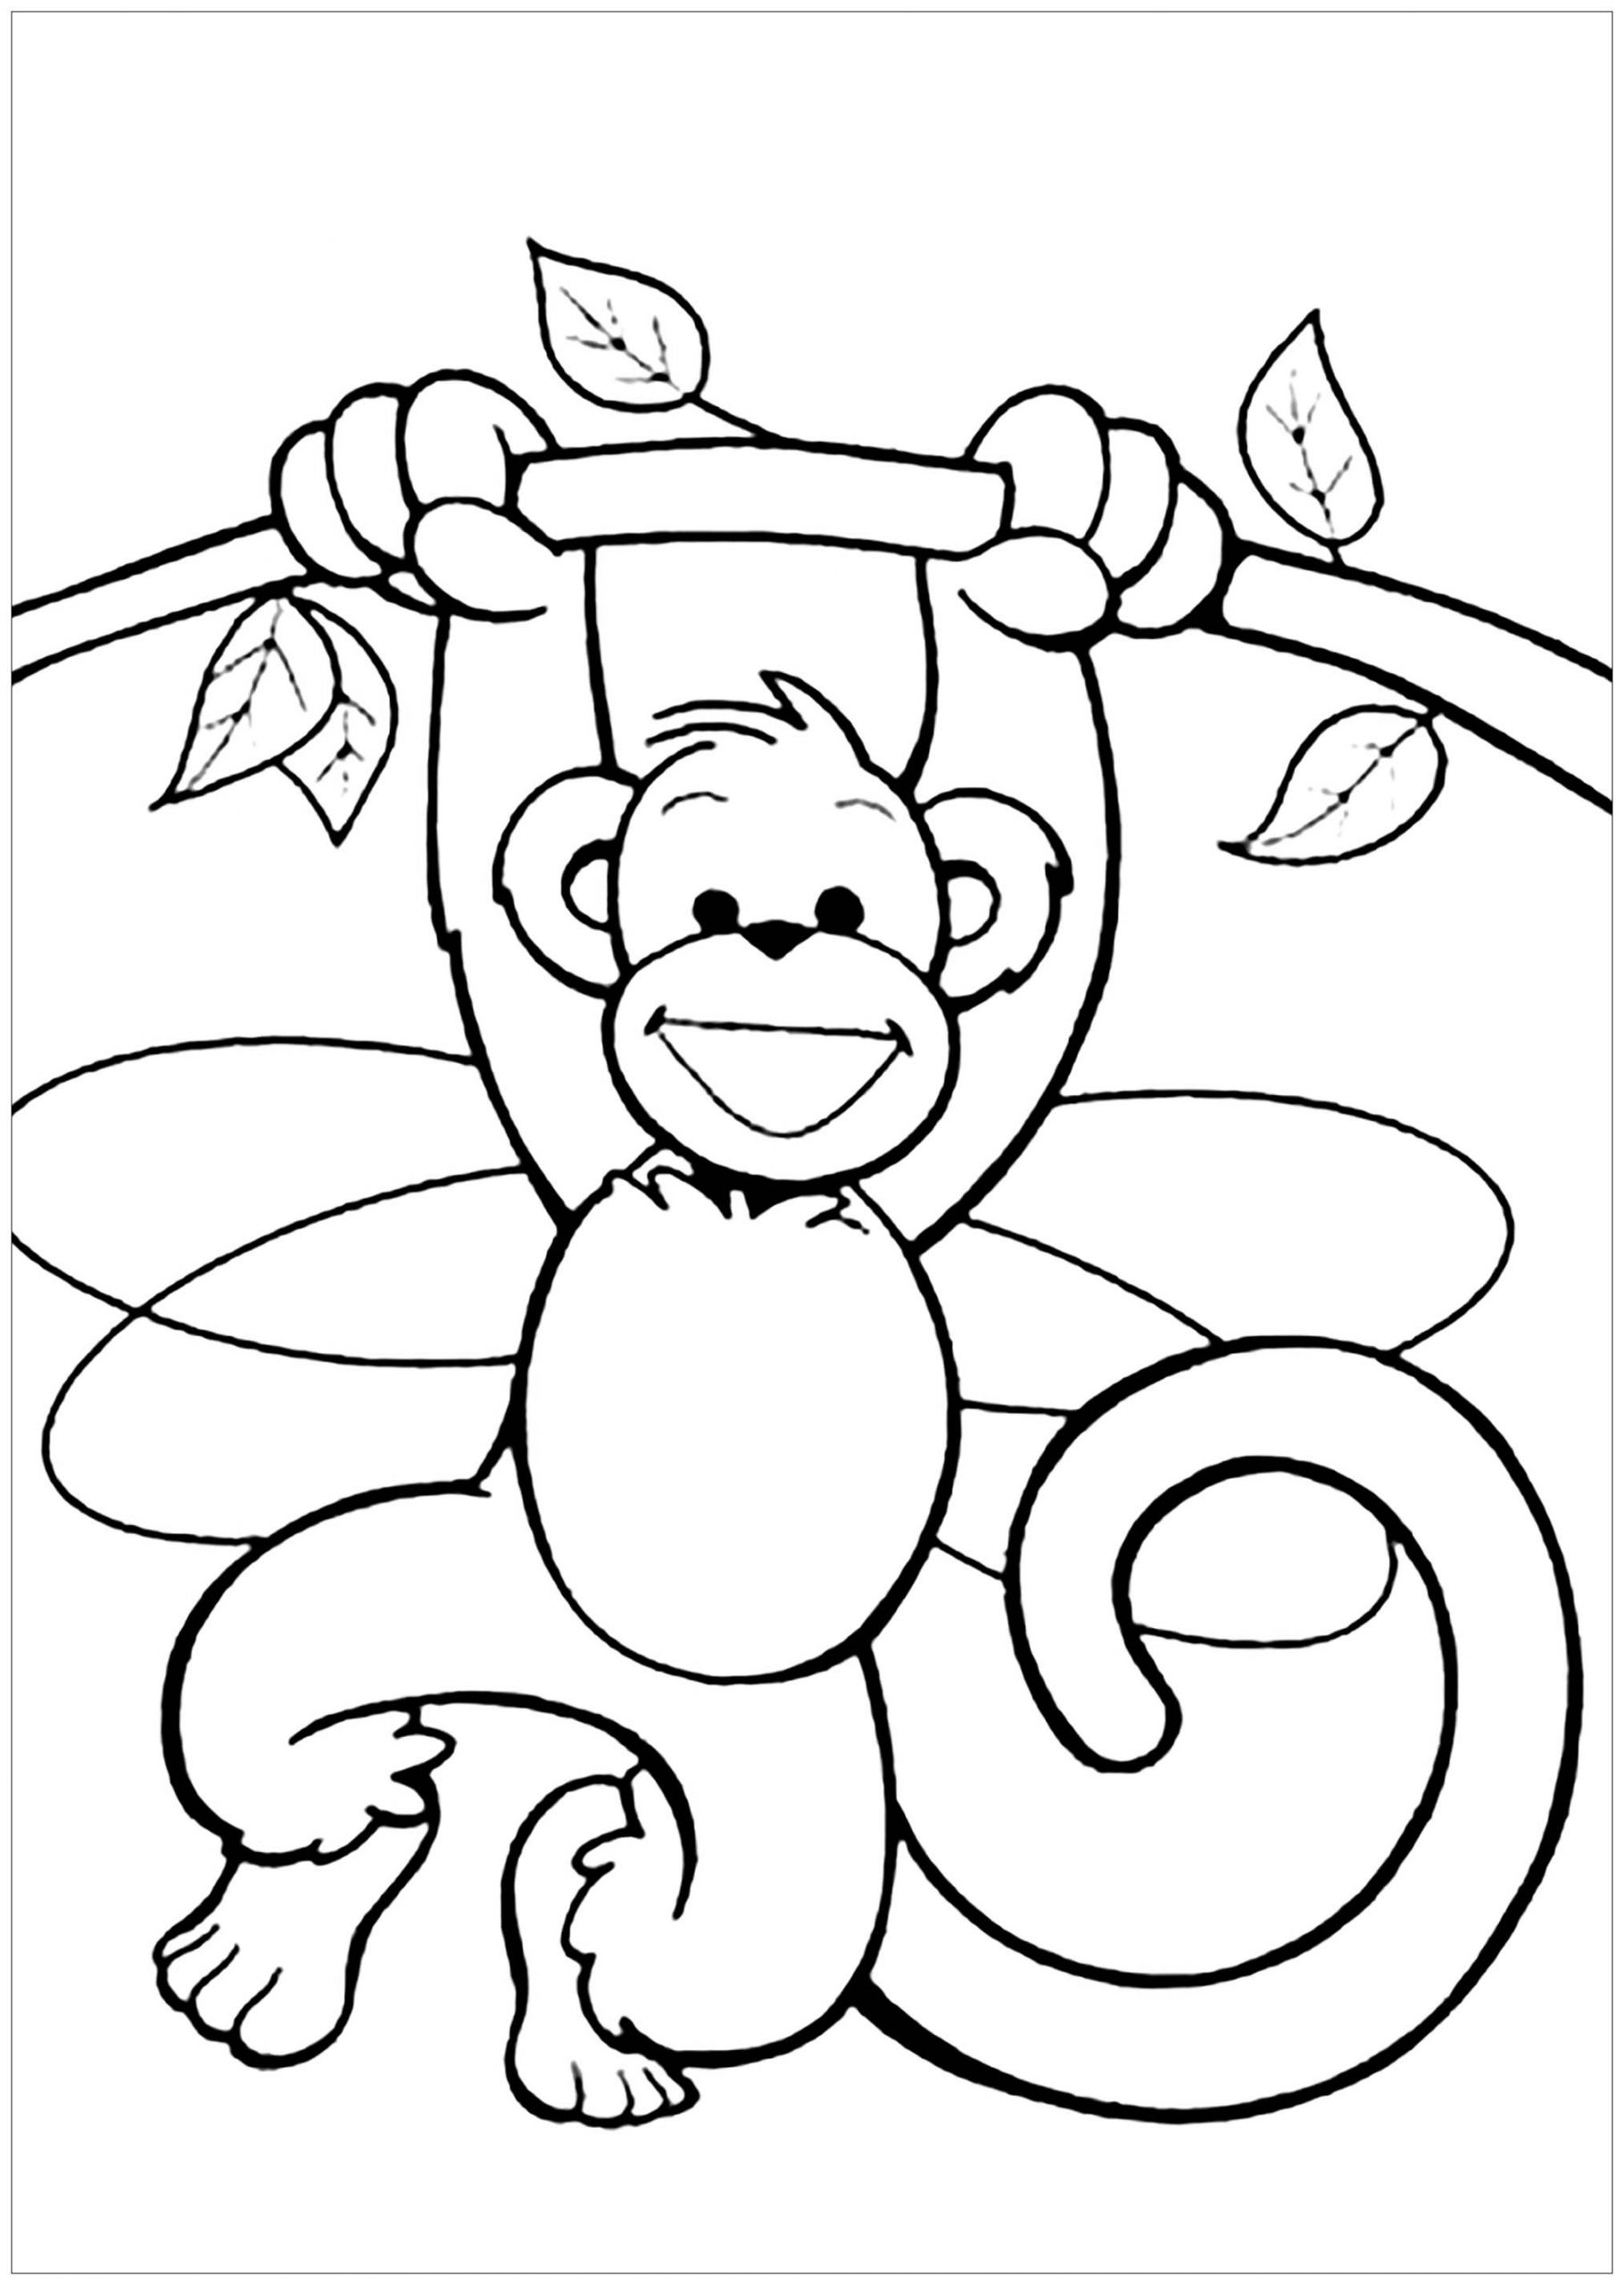 Free Online Coloring Pages For Kids
 Monkeys to for free Monkeys Kids Coloring Pages